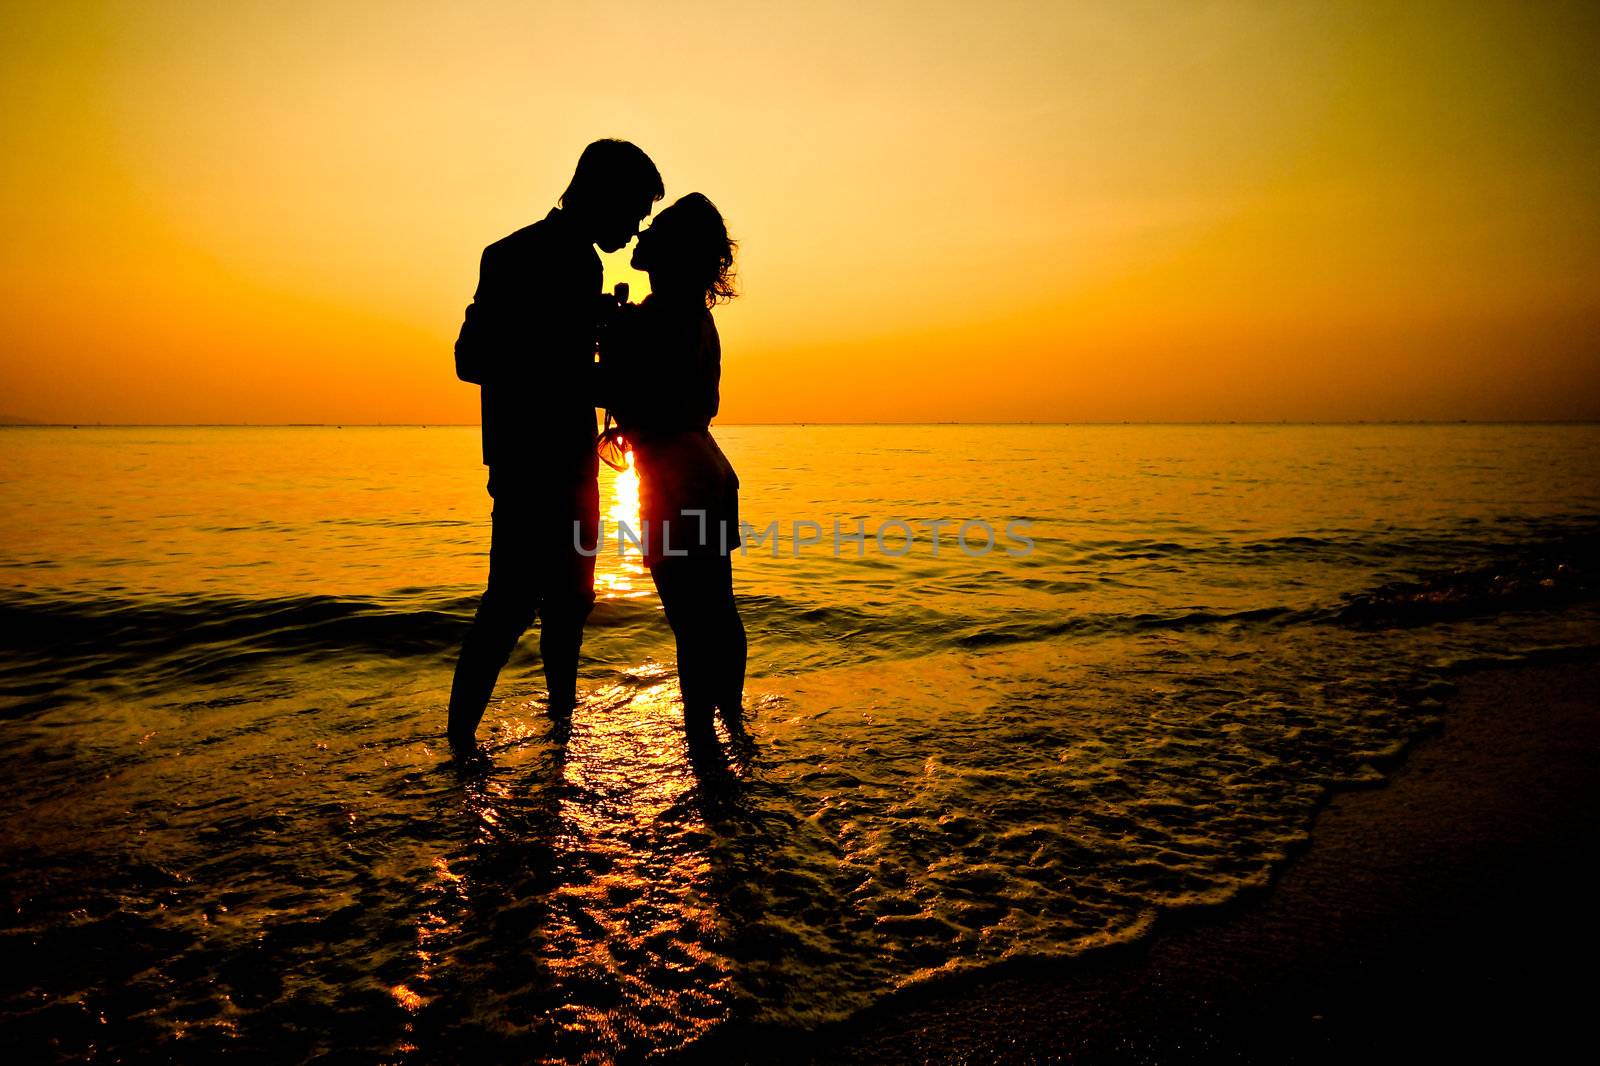 Silhouette of a young romantic couple  on sunset